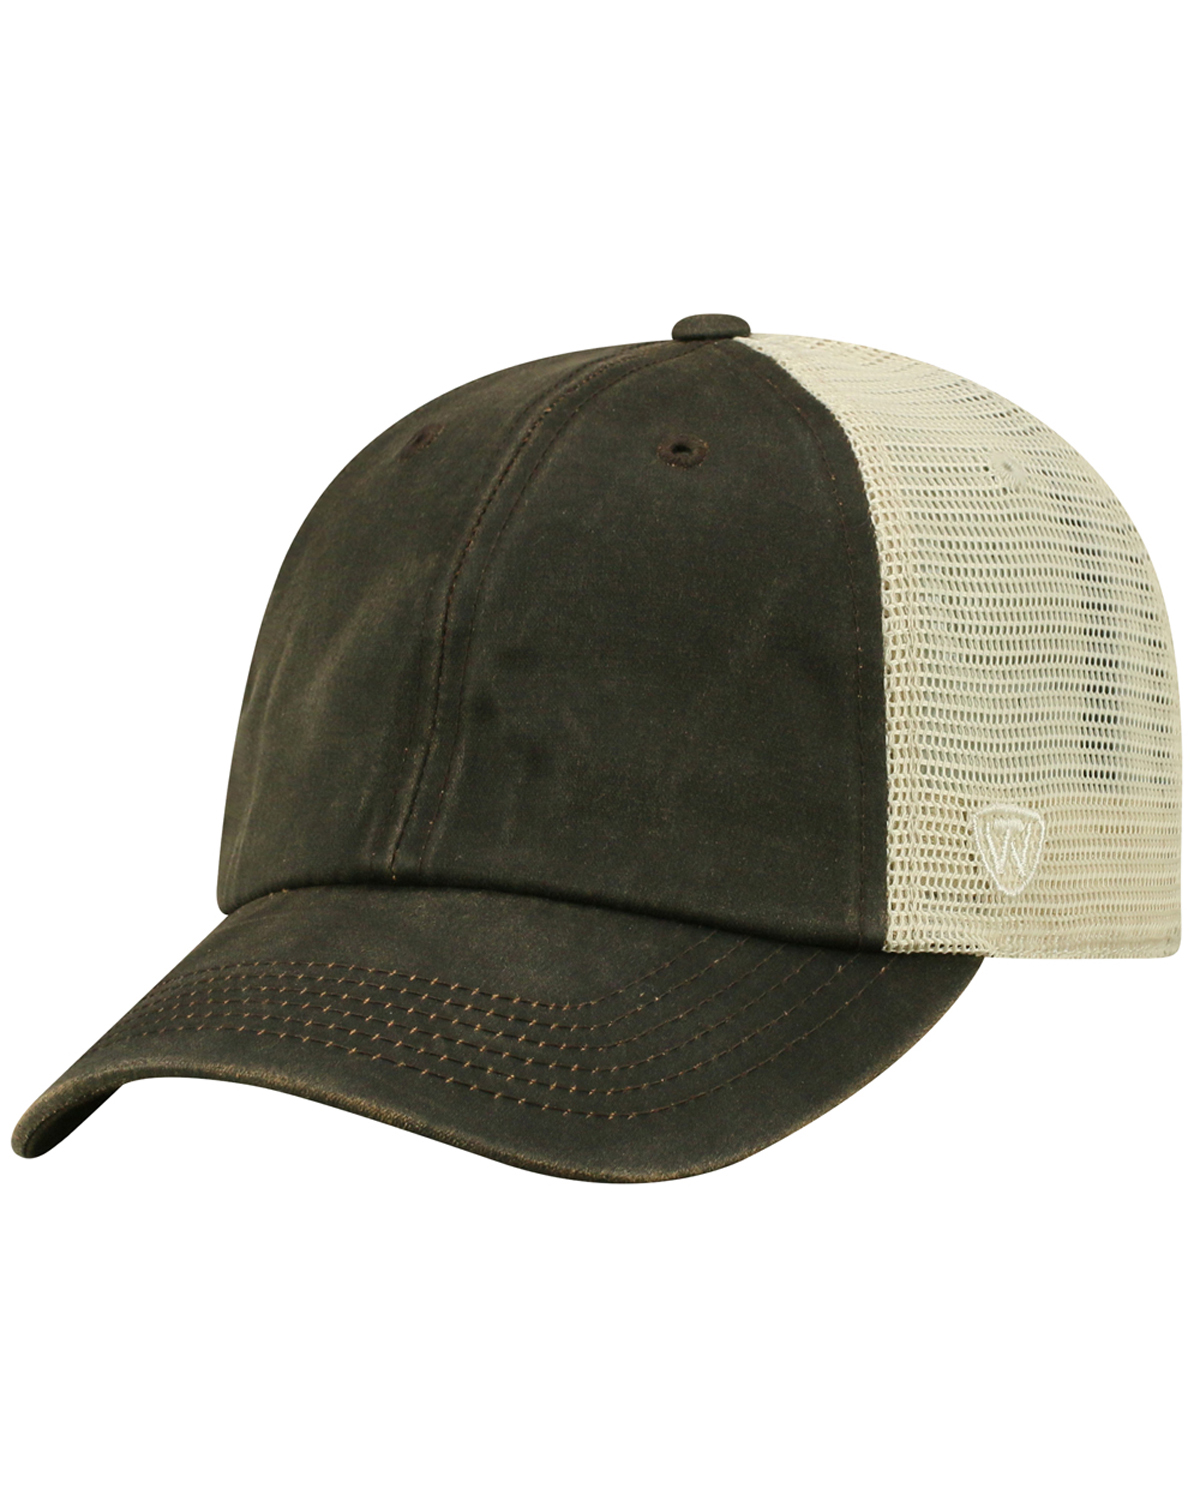 'Top Of The World TW5529 Adult Chestnut Cap'